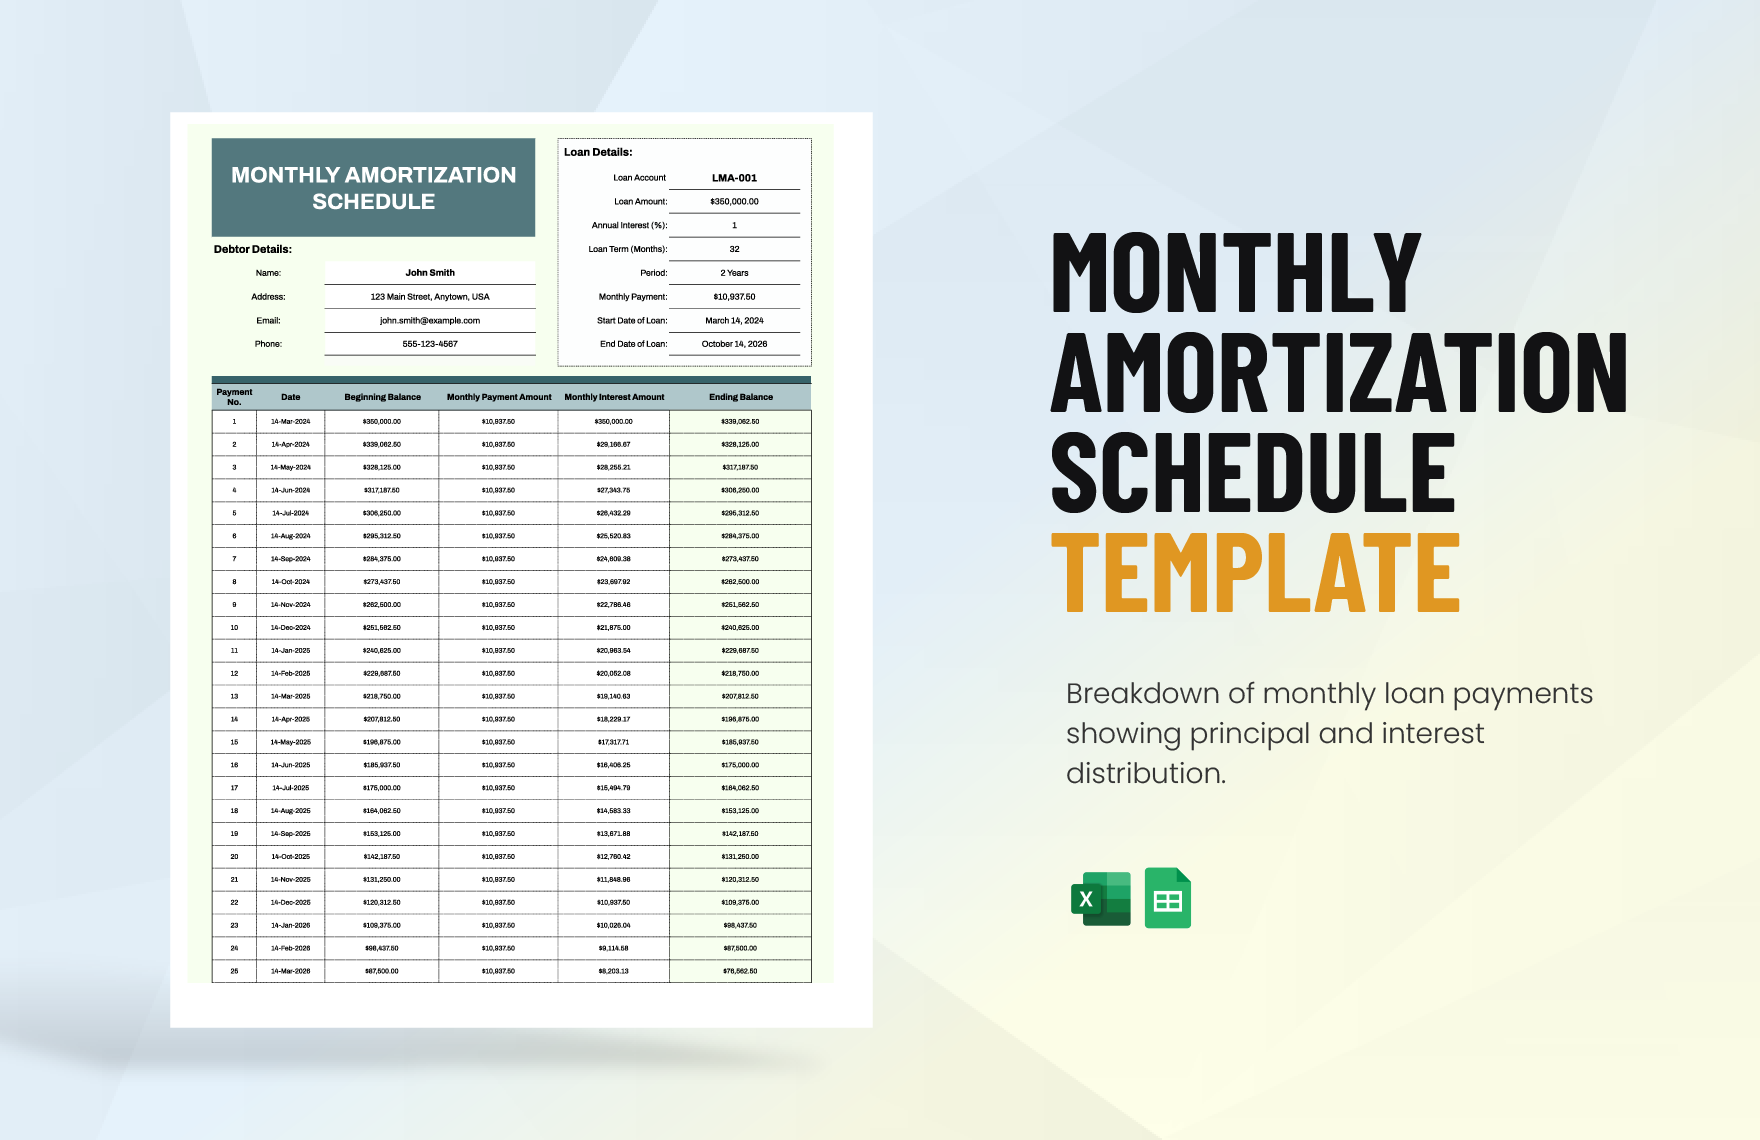 Monthly Amortization Schedule Template in Excel, Google Sheets